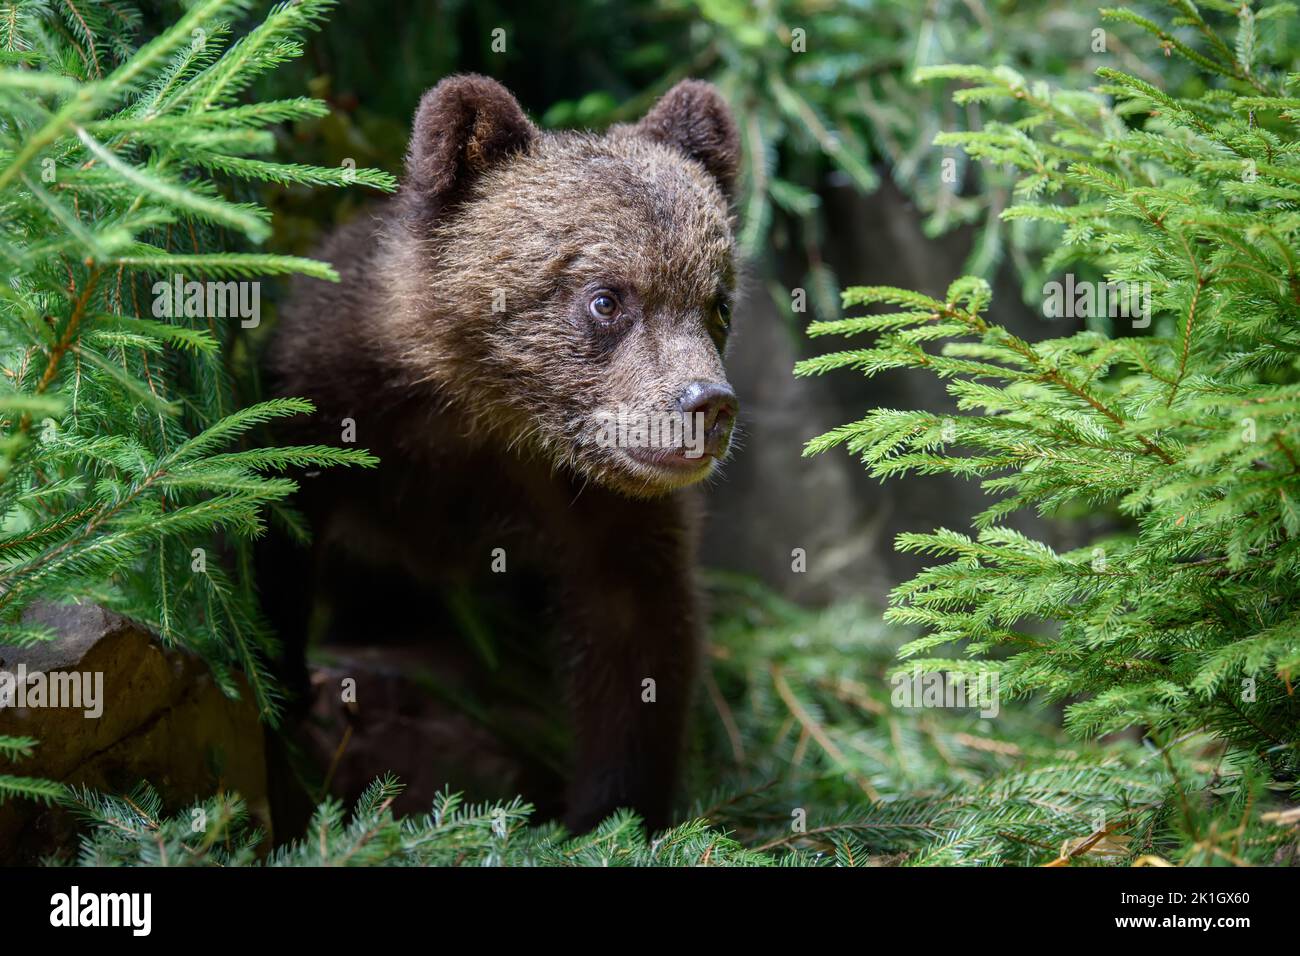 Young brown bear cub in the forest with pine branch. Wild animal in the nature habitat Stock Photo